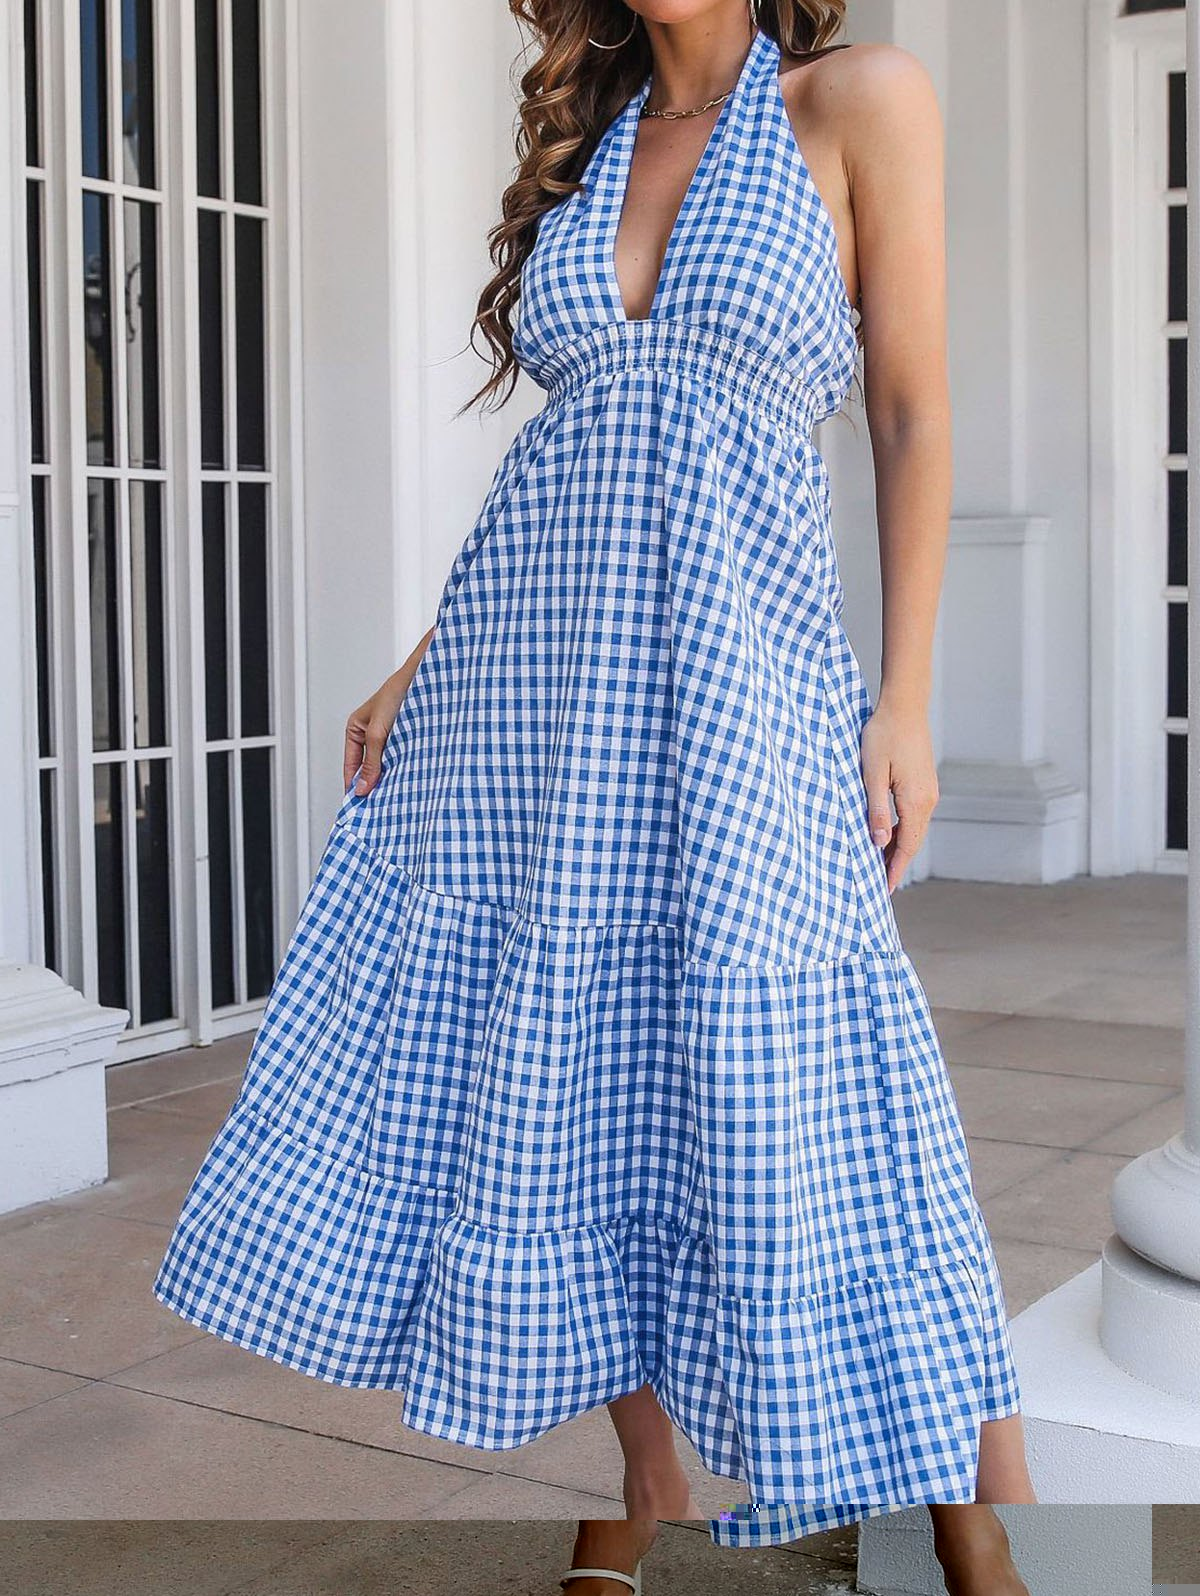 Plaid Print Halter Dress Plunging Neck High Waisted Tied Open Back A Line Maxi Dress - BLUE M